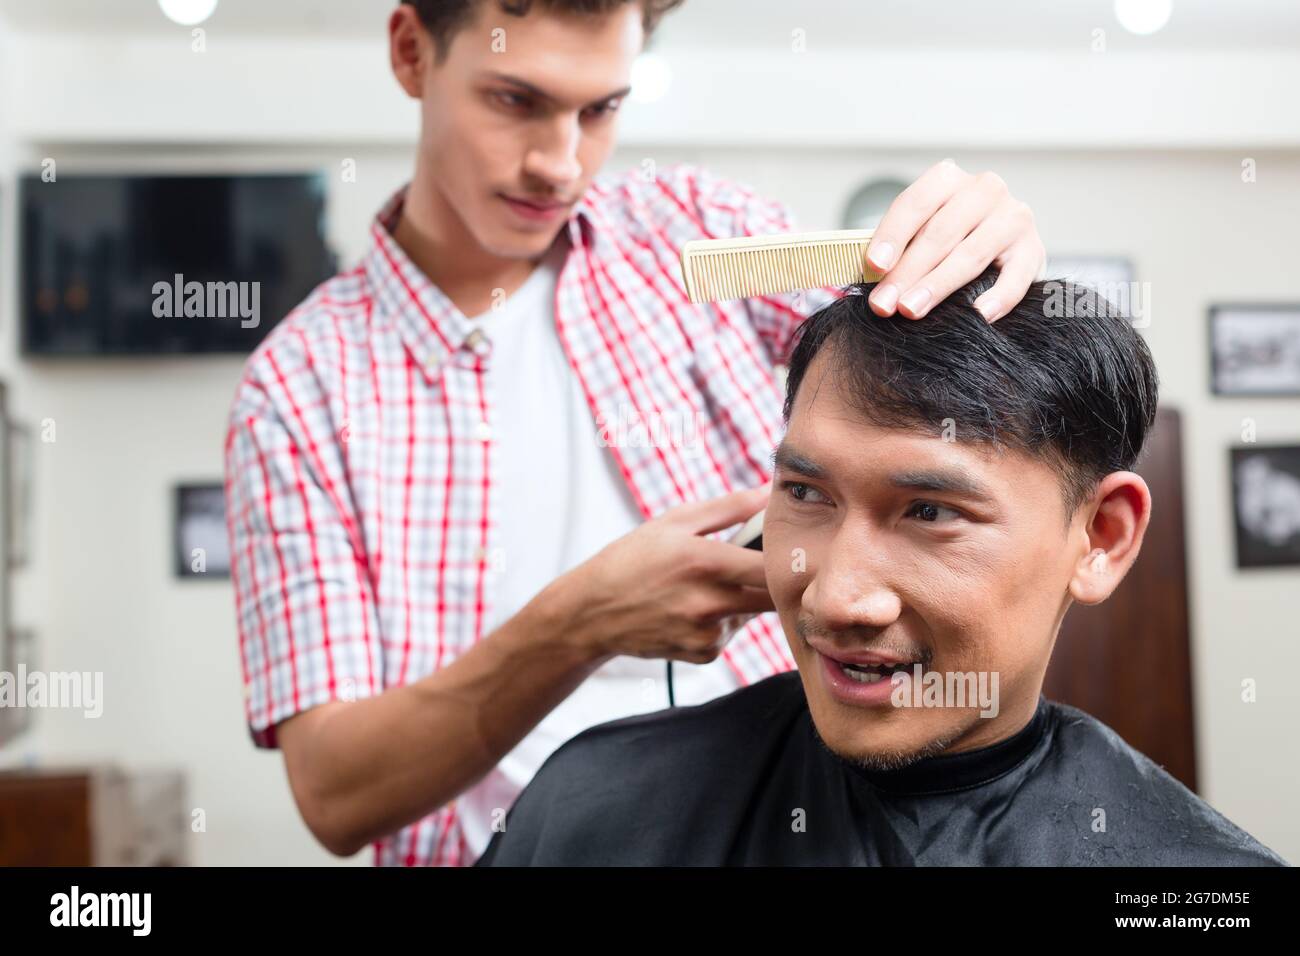 Barber making haircut of an attractive man in barbershop Stock Photo